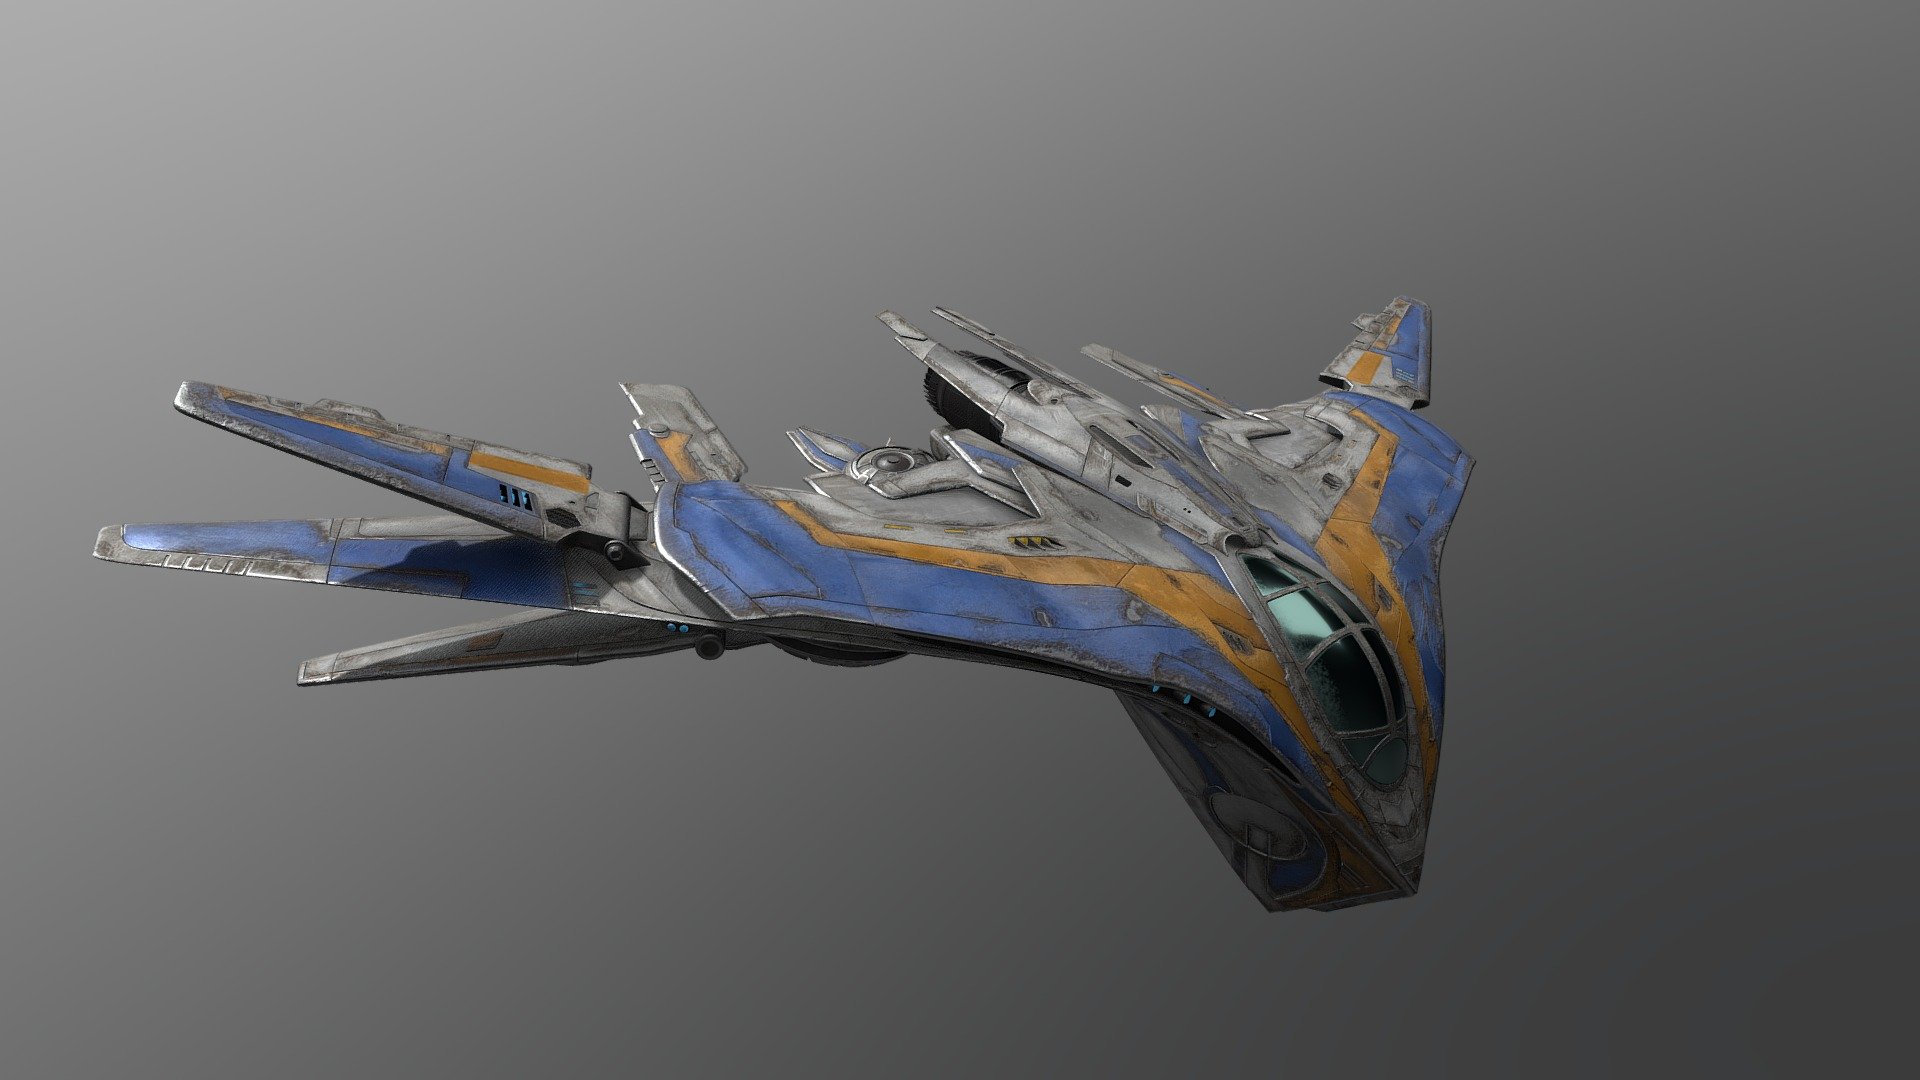 The Milano was an M-class spaceship belonging to Peter Quill, which he used during his escapades as the space outlaw Star-Lord. It later became the main spacecraft used by the Guardians of the Galaxy, until it was severely damaged by a quantum asteroid field, and abandoned on Berhert unrepaired.



spaceship35 8k resolution

The file includes :

-3ds max Version 2017
-FBX Version
-texture (PBR) set is in 8k resolution.

They contain:

Base color map (81928192)
Metallic map (81928192)
Roughness map (81928192)
Normal map (81928192) 
Ambient Occlusion Map (8192*8192)

Kindly follow me on Artsation

I really need your support to continue :) - Milano_GotG - 3D model by mohamedhussien 3d model